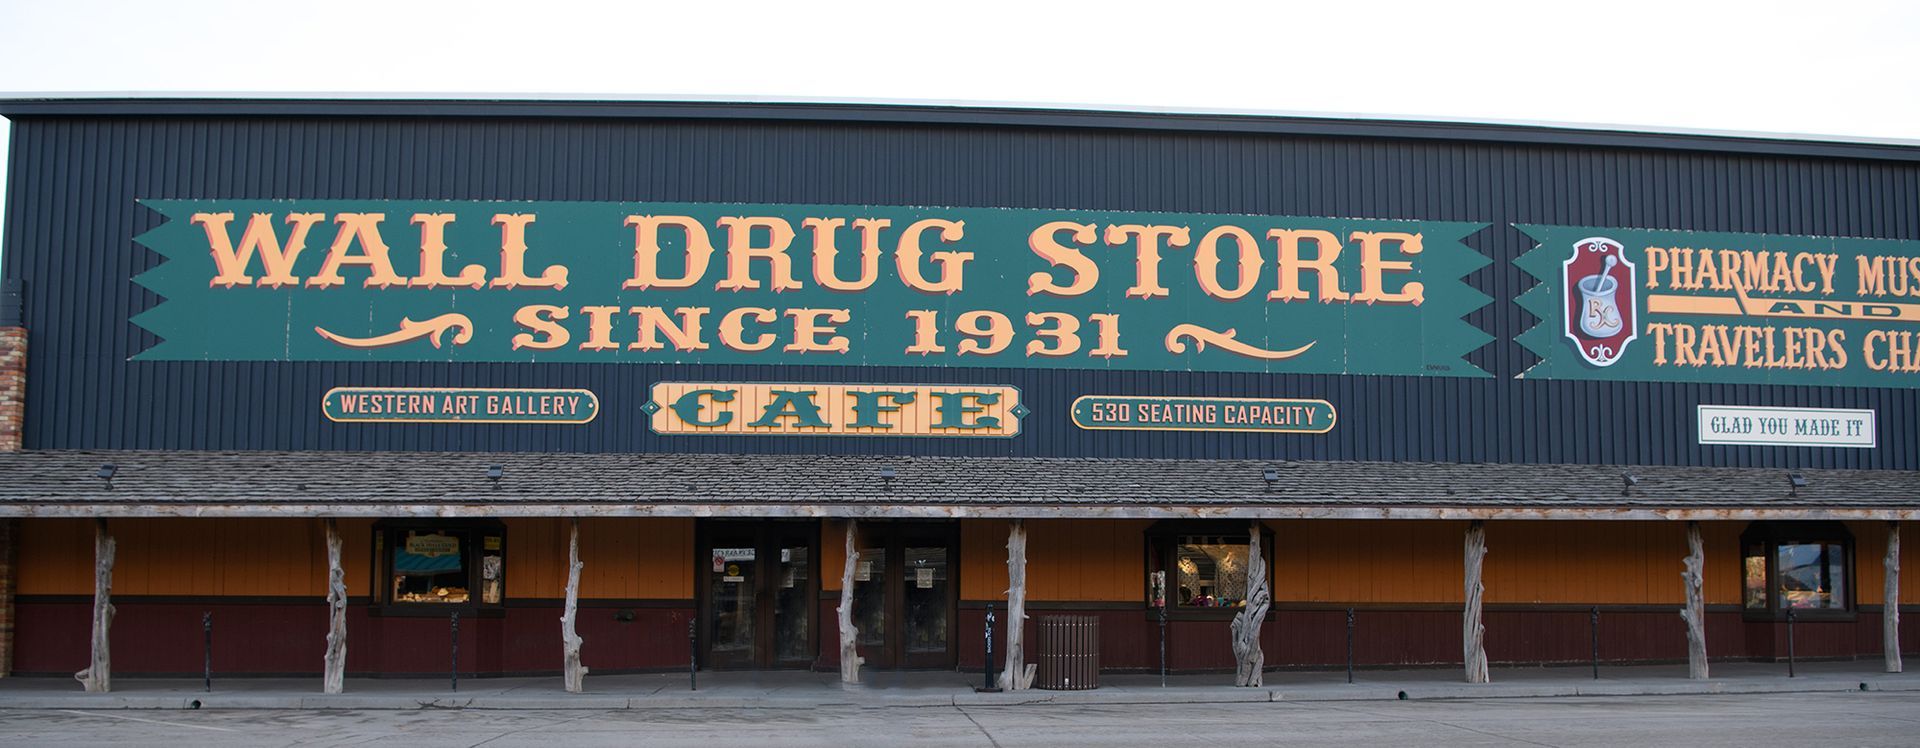 The wall drug store has been open since 1931